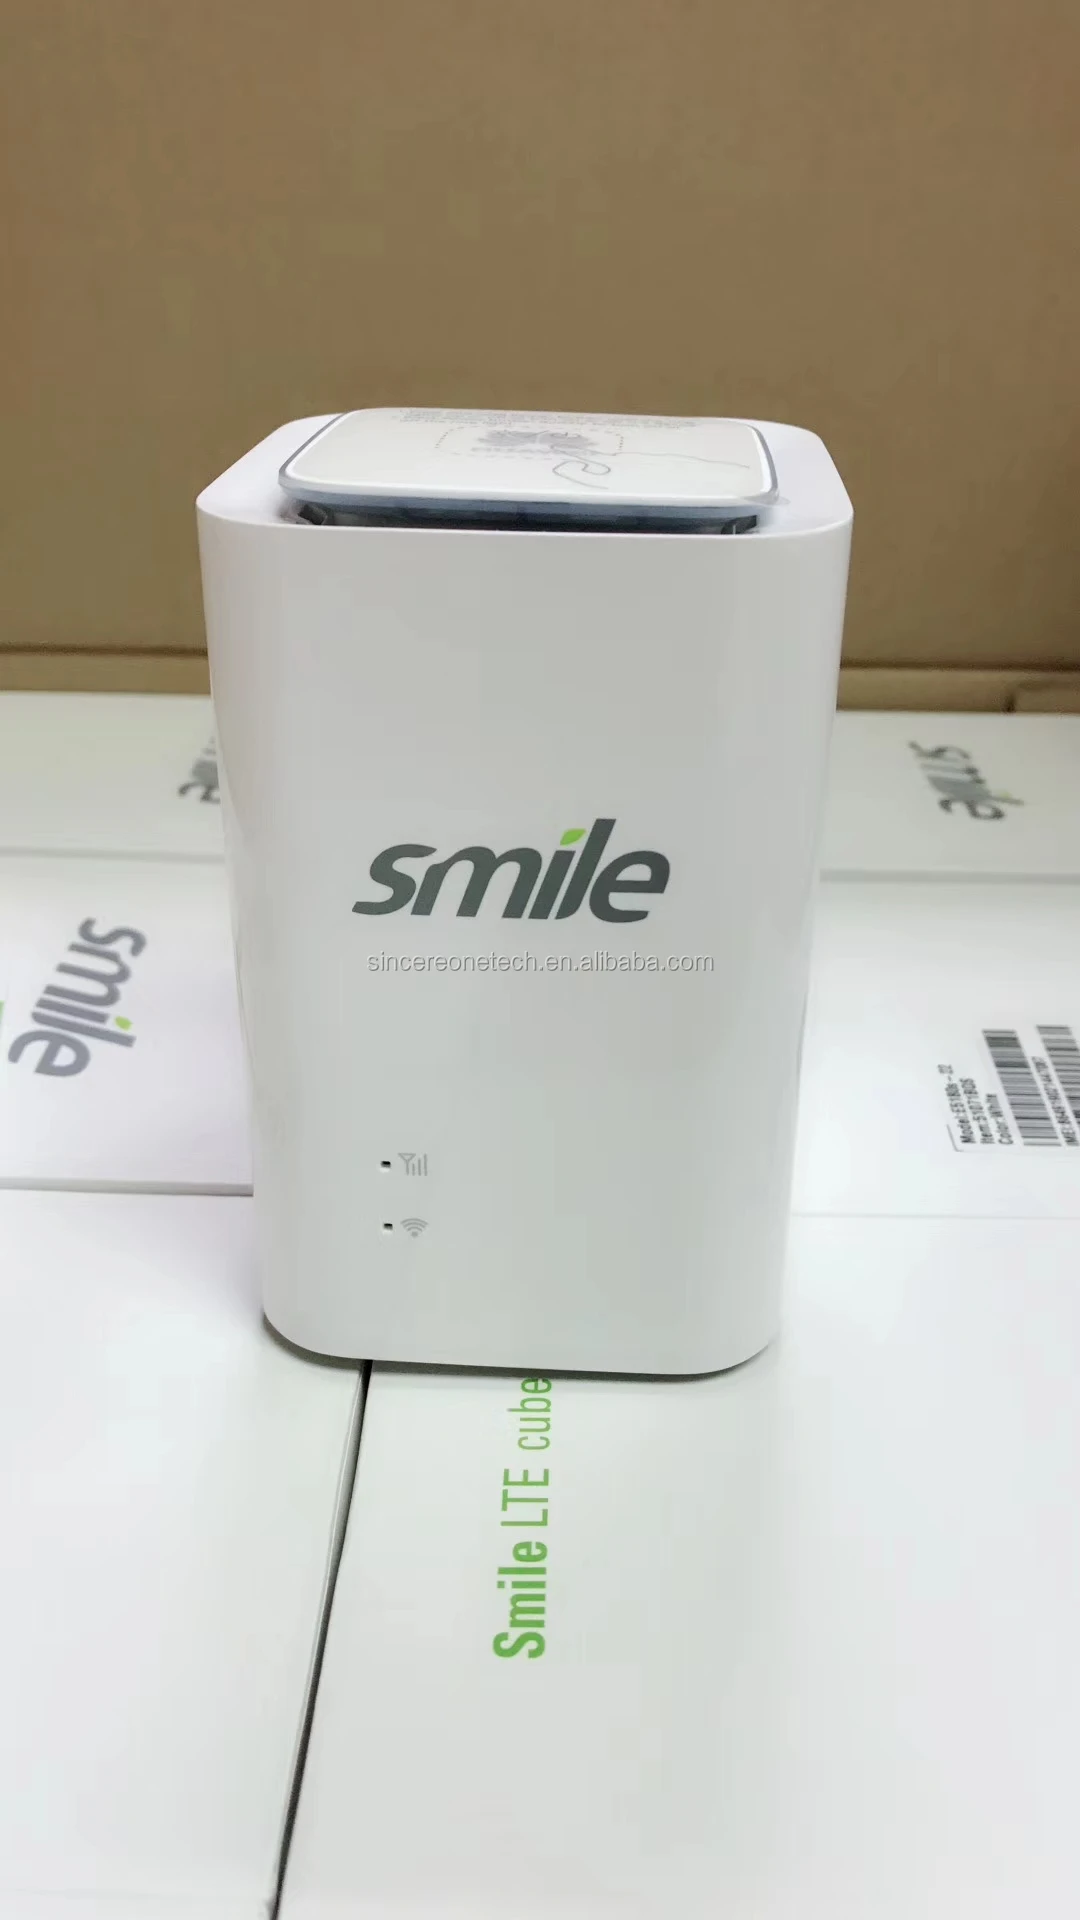 Source 4g cpe router E5180s-22 4G WiFi Cube up 32 users on m.alibaba.com